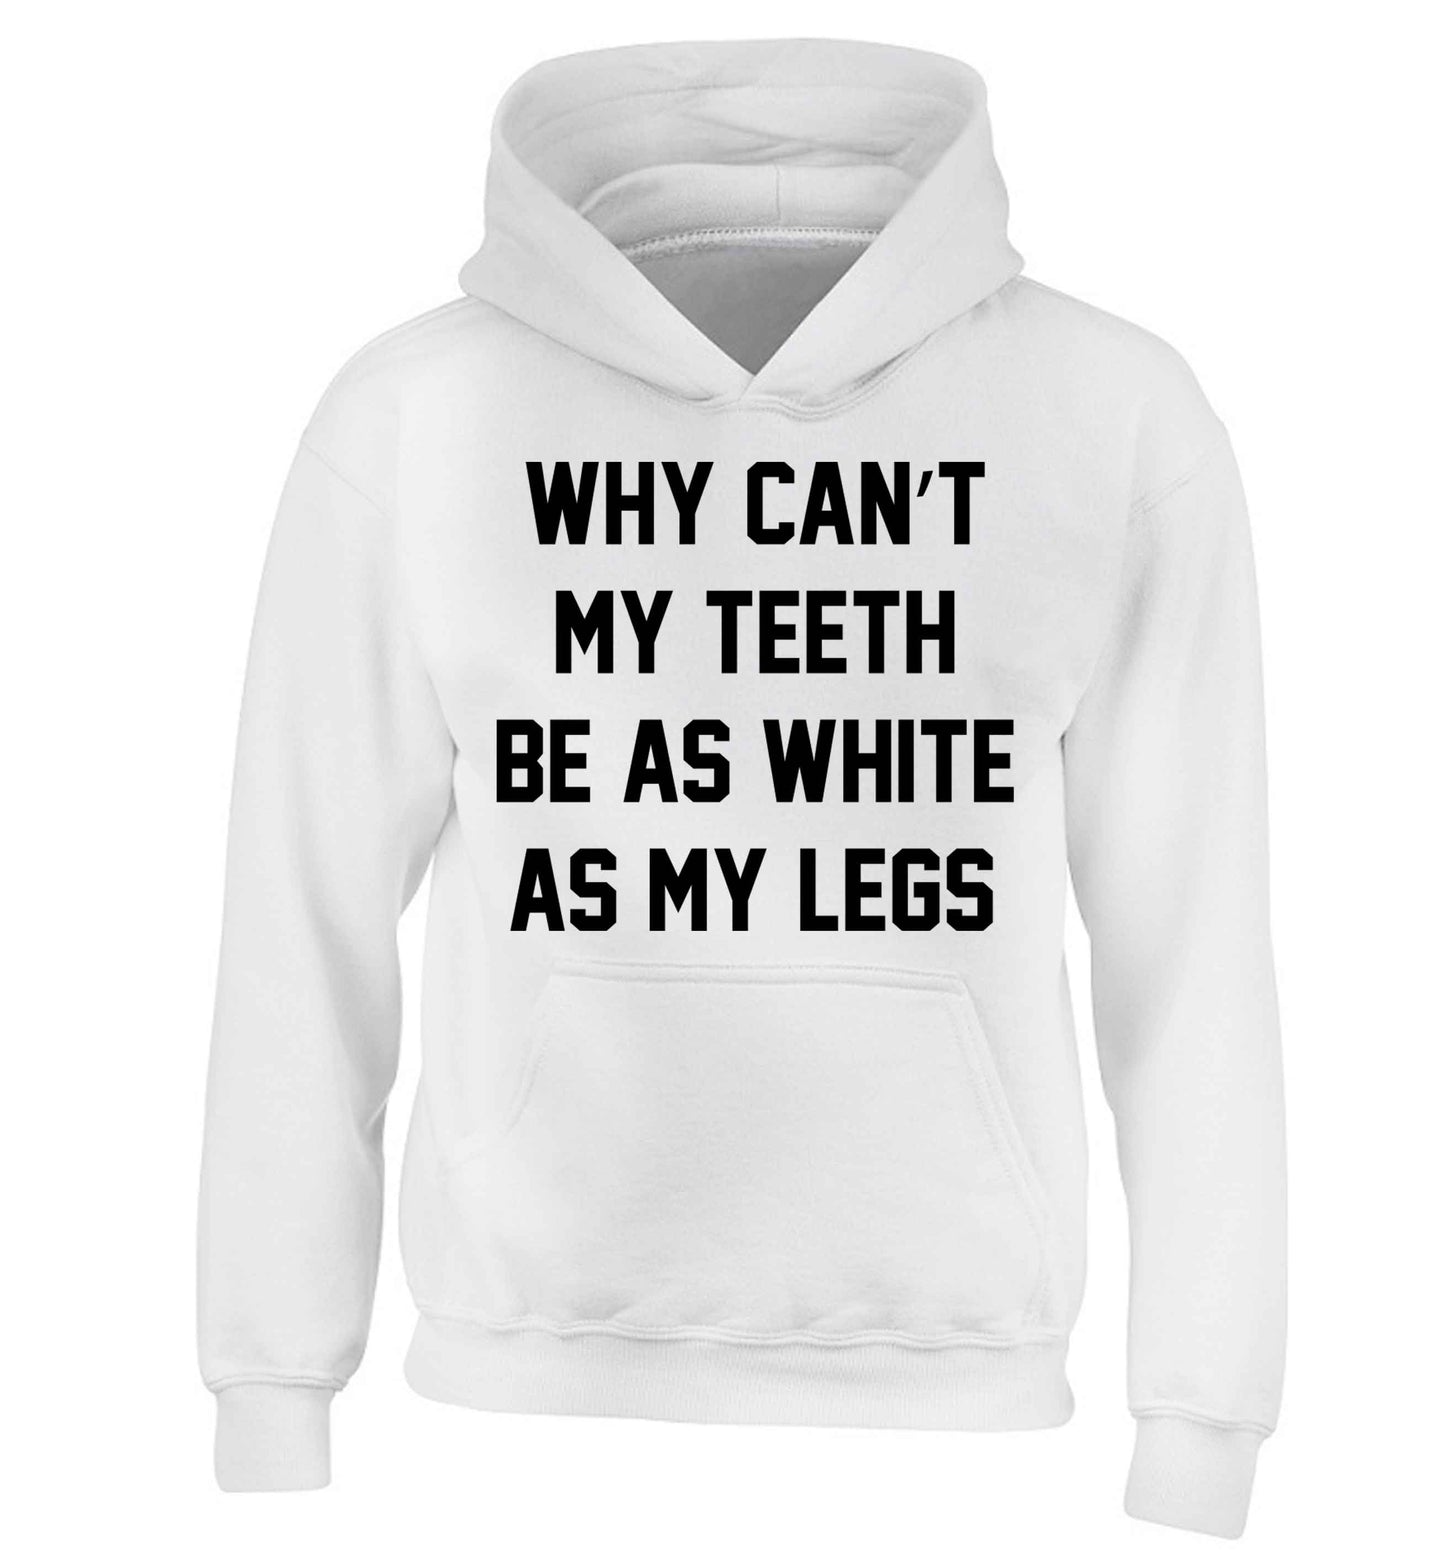 Why can't my teeth be as white as my legs children's white hoodie 12-13 Years